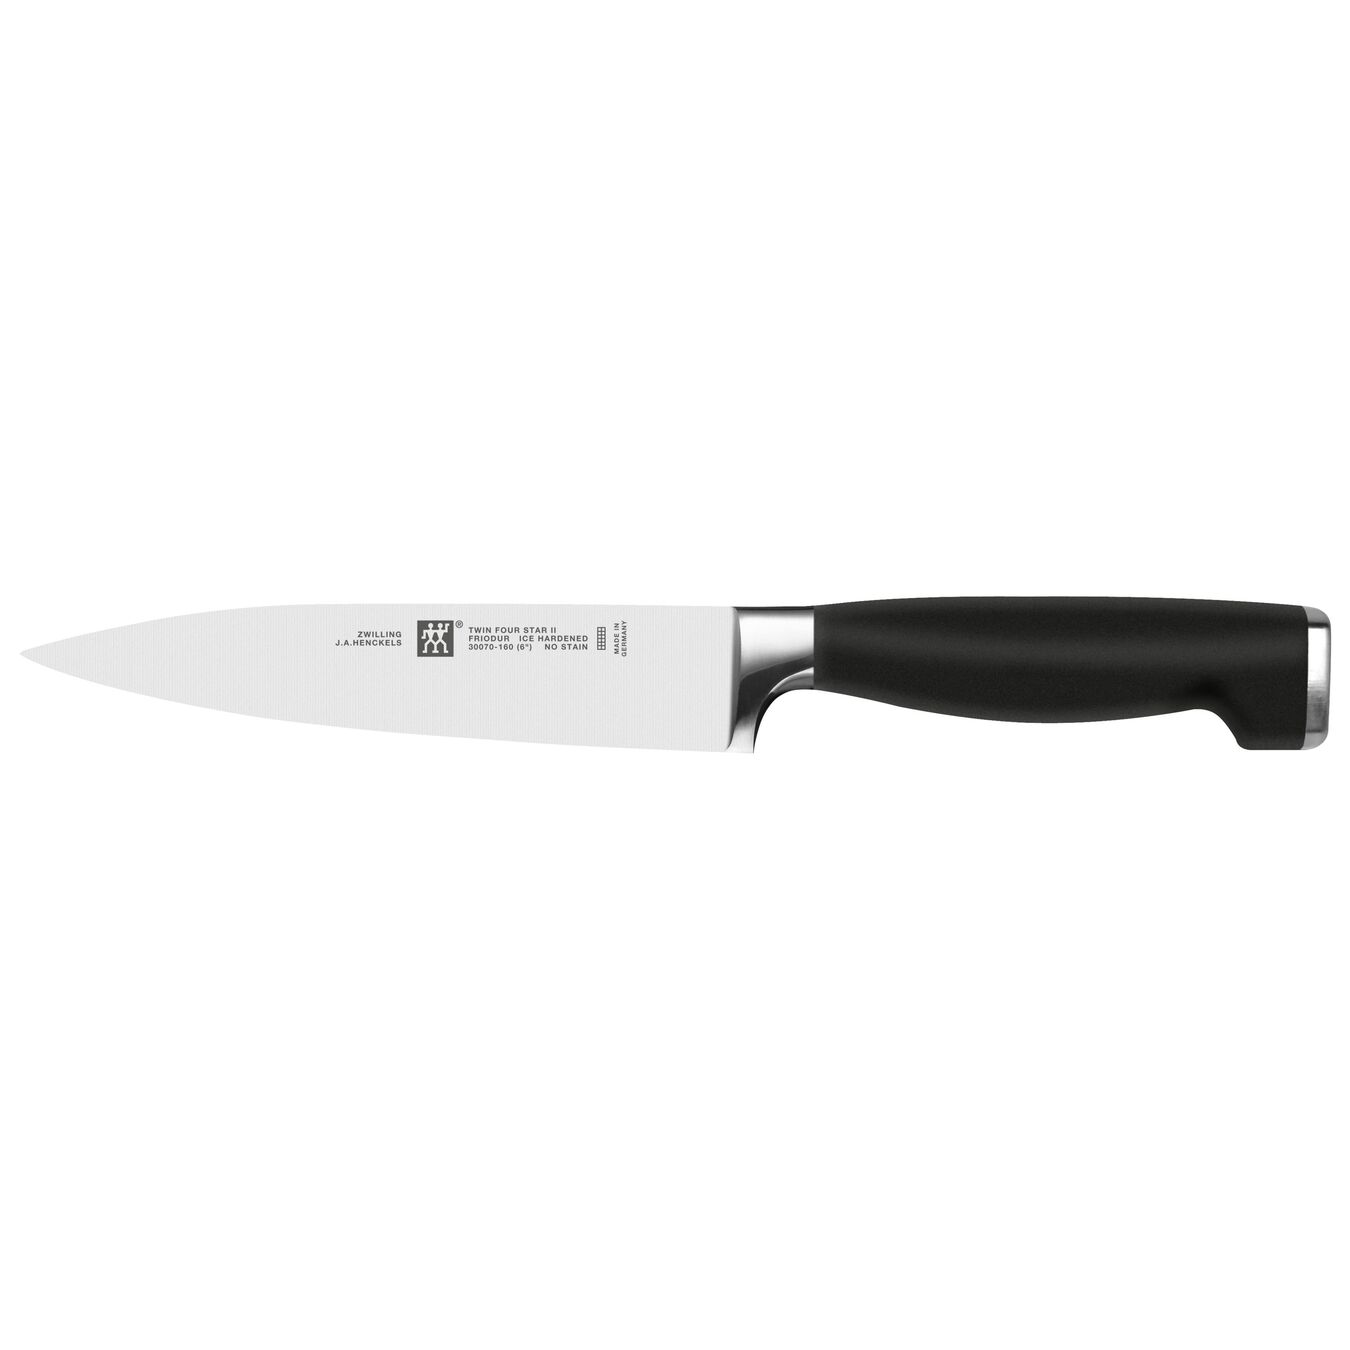 6.5 inch Carving knife - Visual Imperfections,,large 1